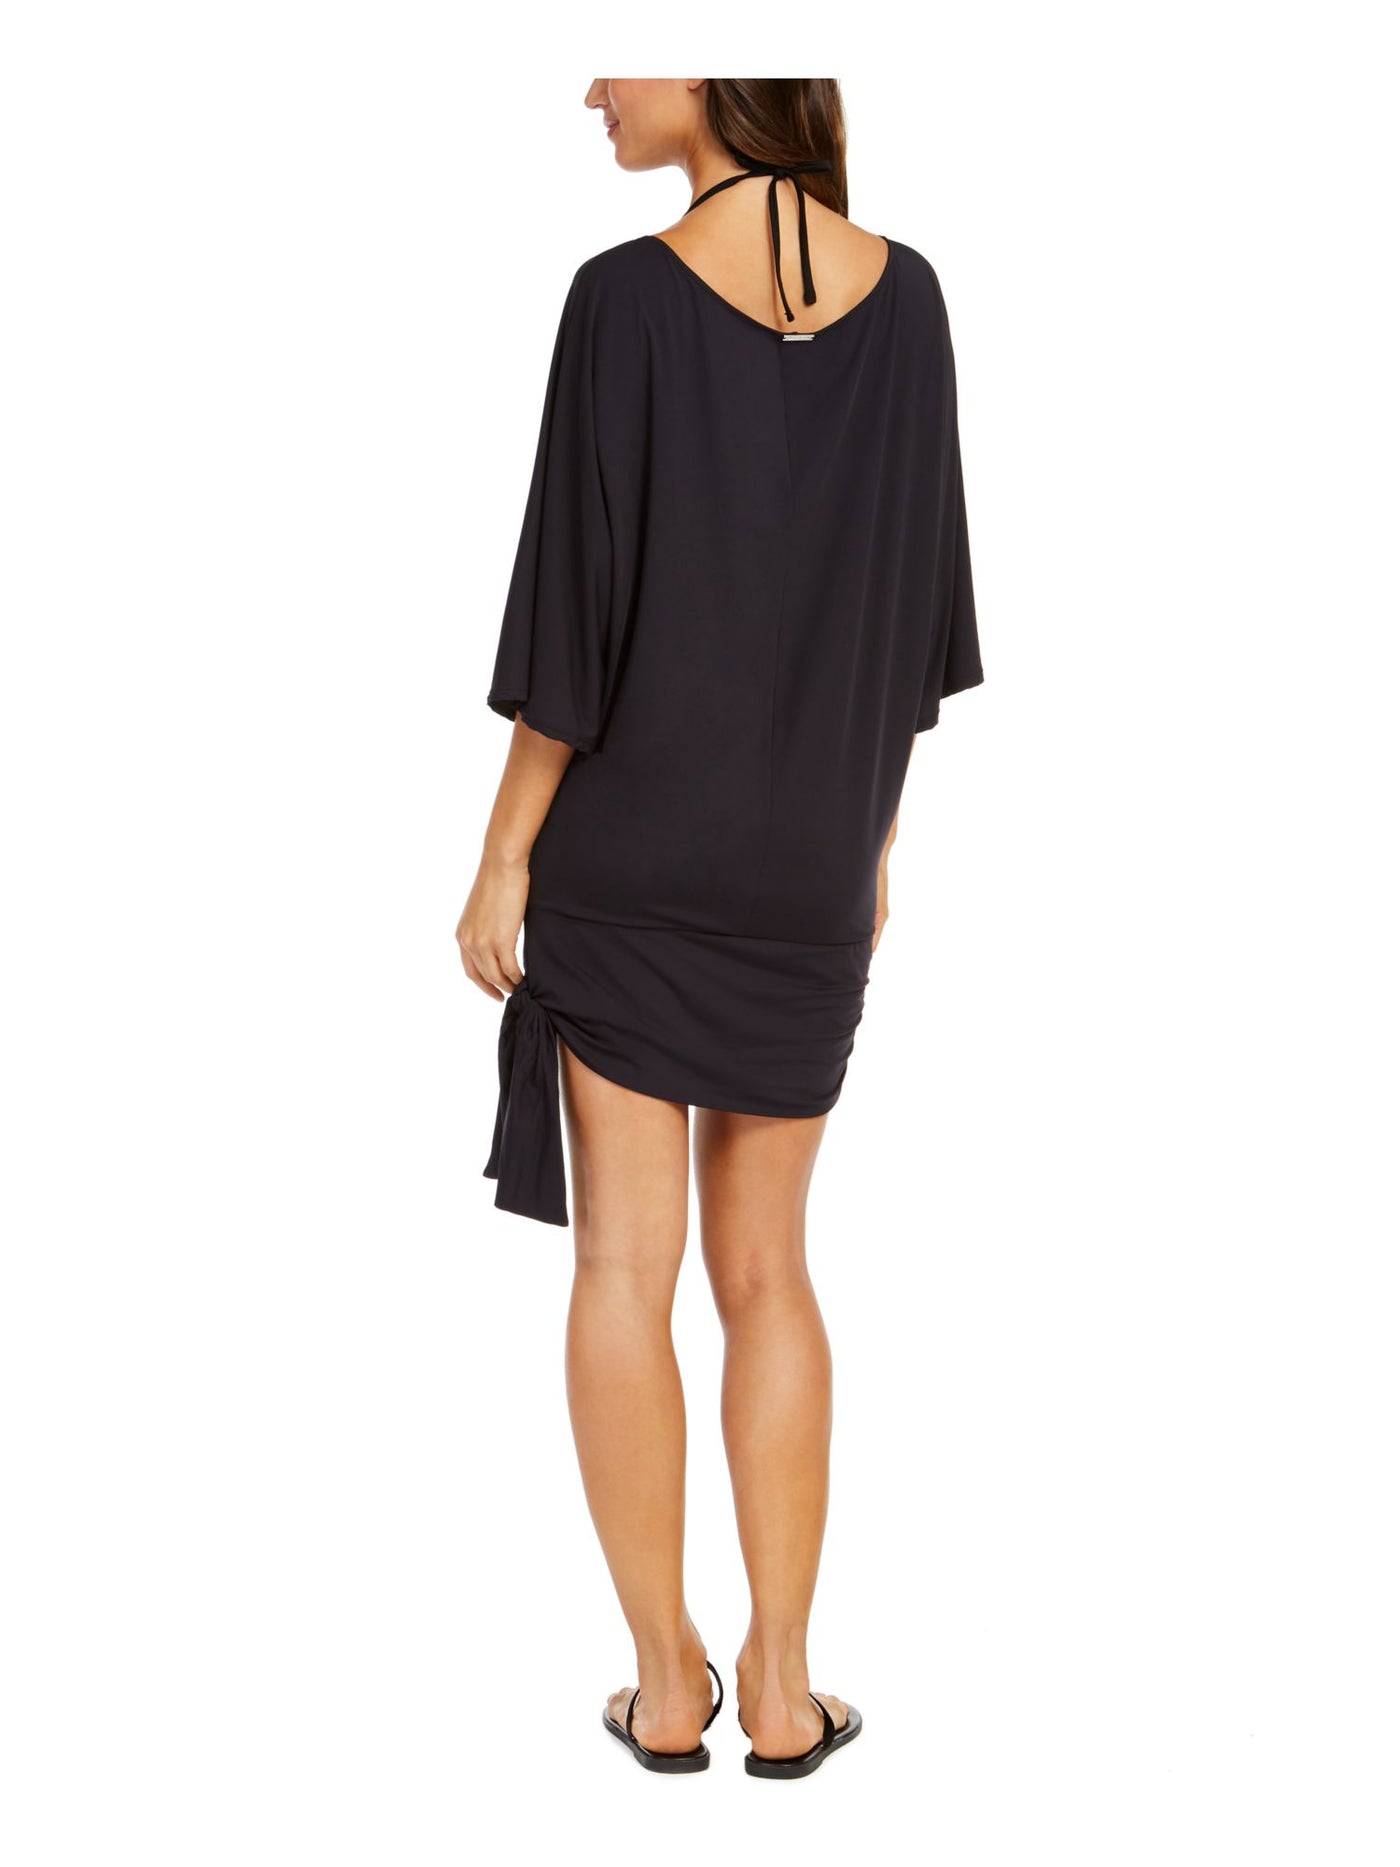 MICHAEL MICHAEL KORS Women's Black Stretch Pullover Dress Side Tie Scoop Neck Swimsuit Cover Up S